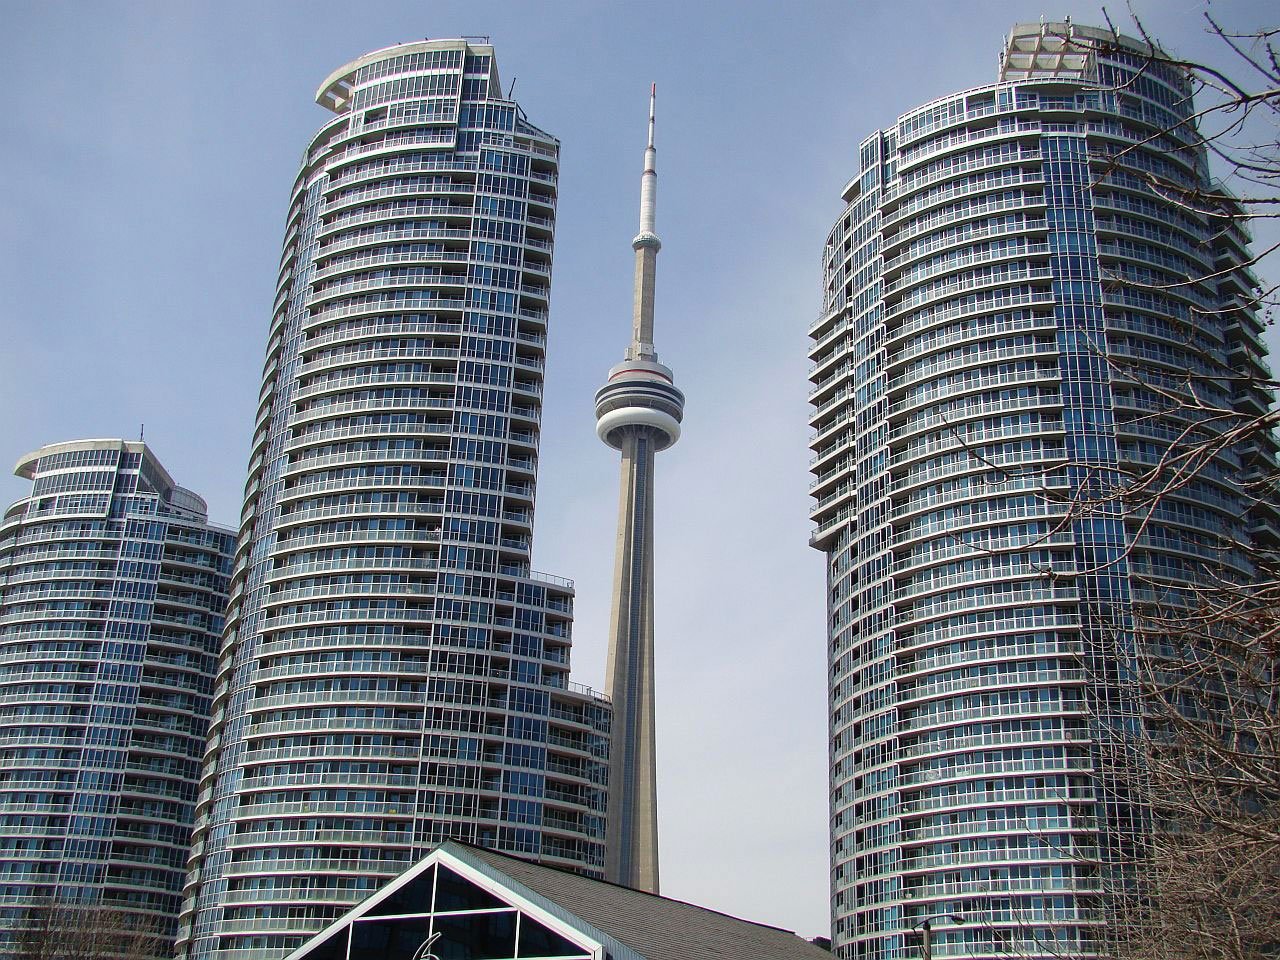 Toronto Real Estate Saw Condo Inventory Decline By 56% In December